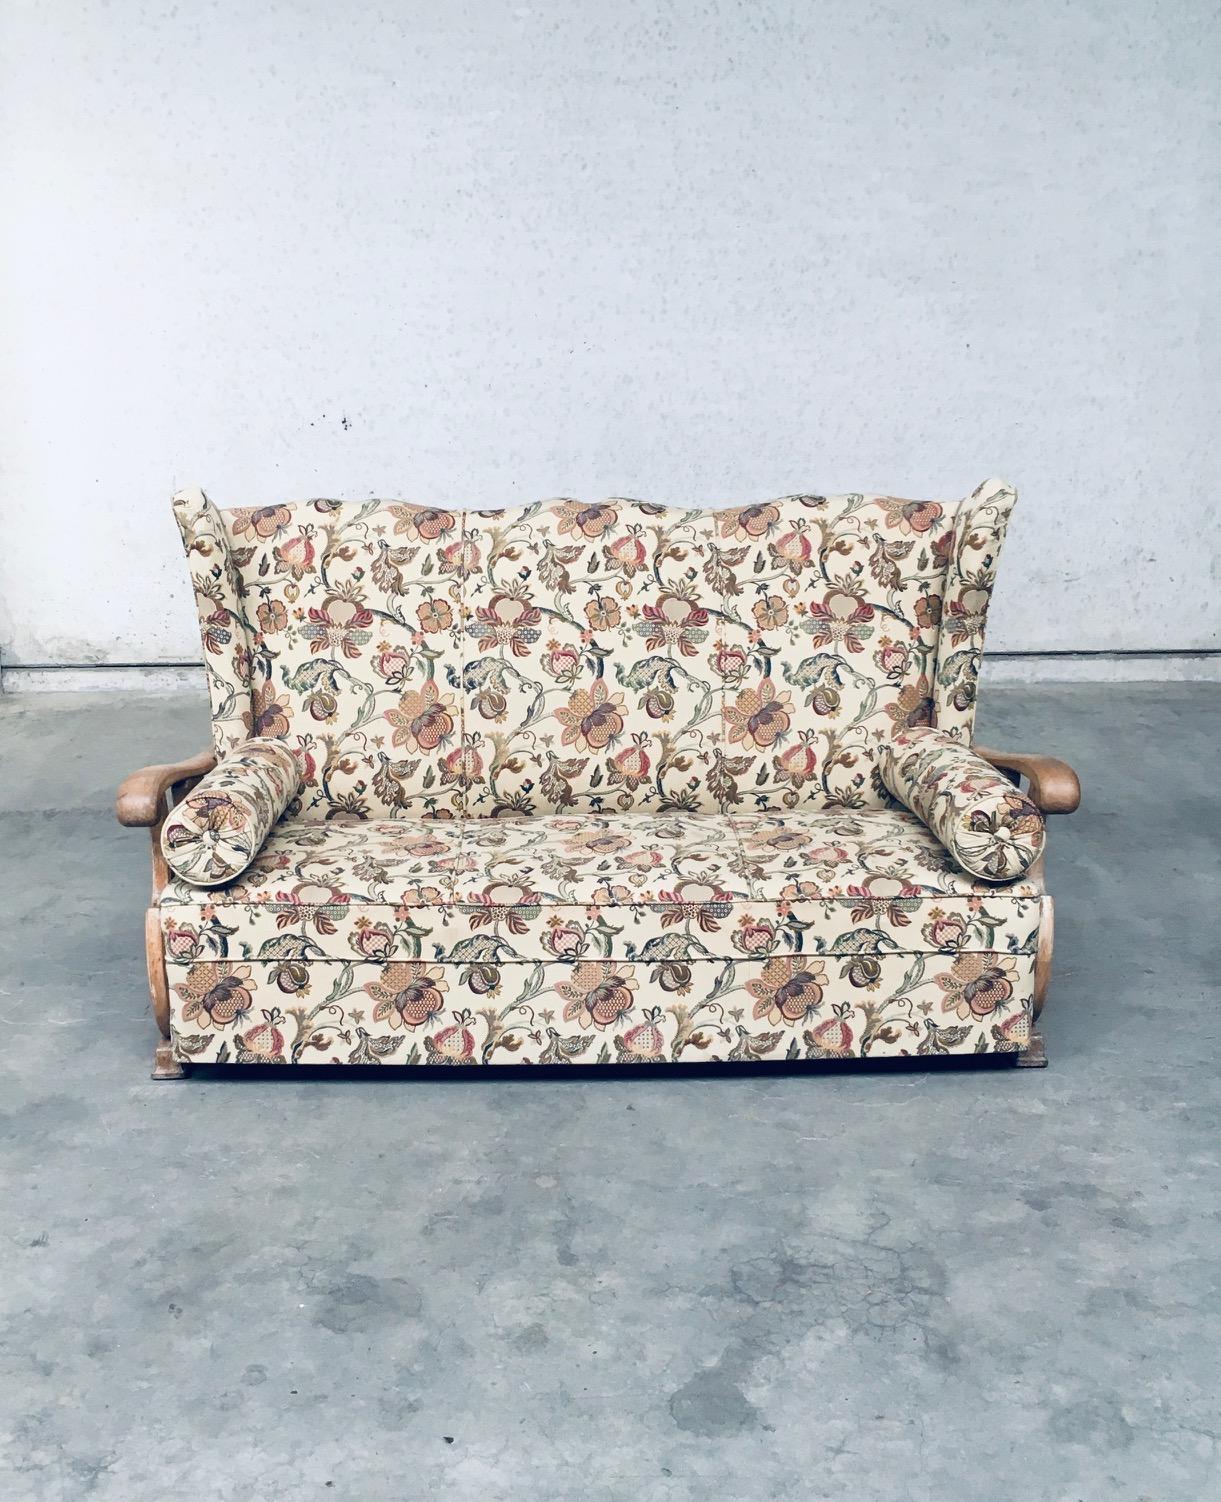 Early 1900's Design High Wing Back 3 Seat Sofa In Good Condition For Sale In Oud-Turnhout, VAN